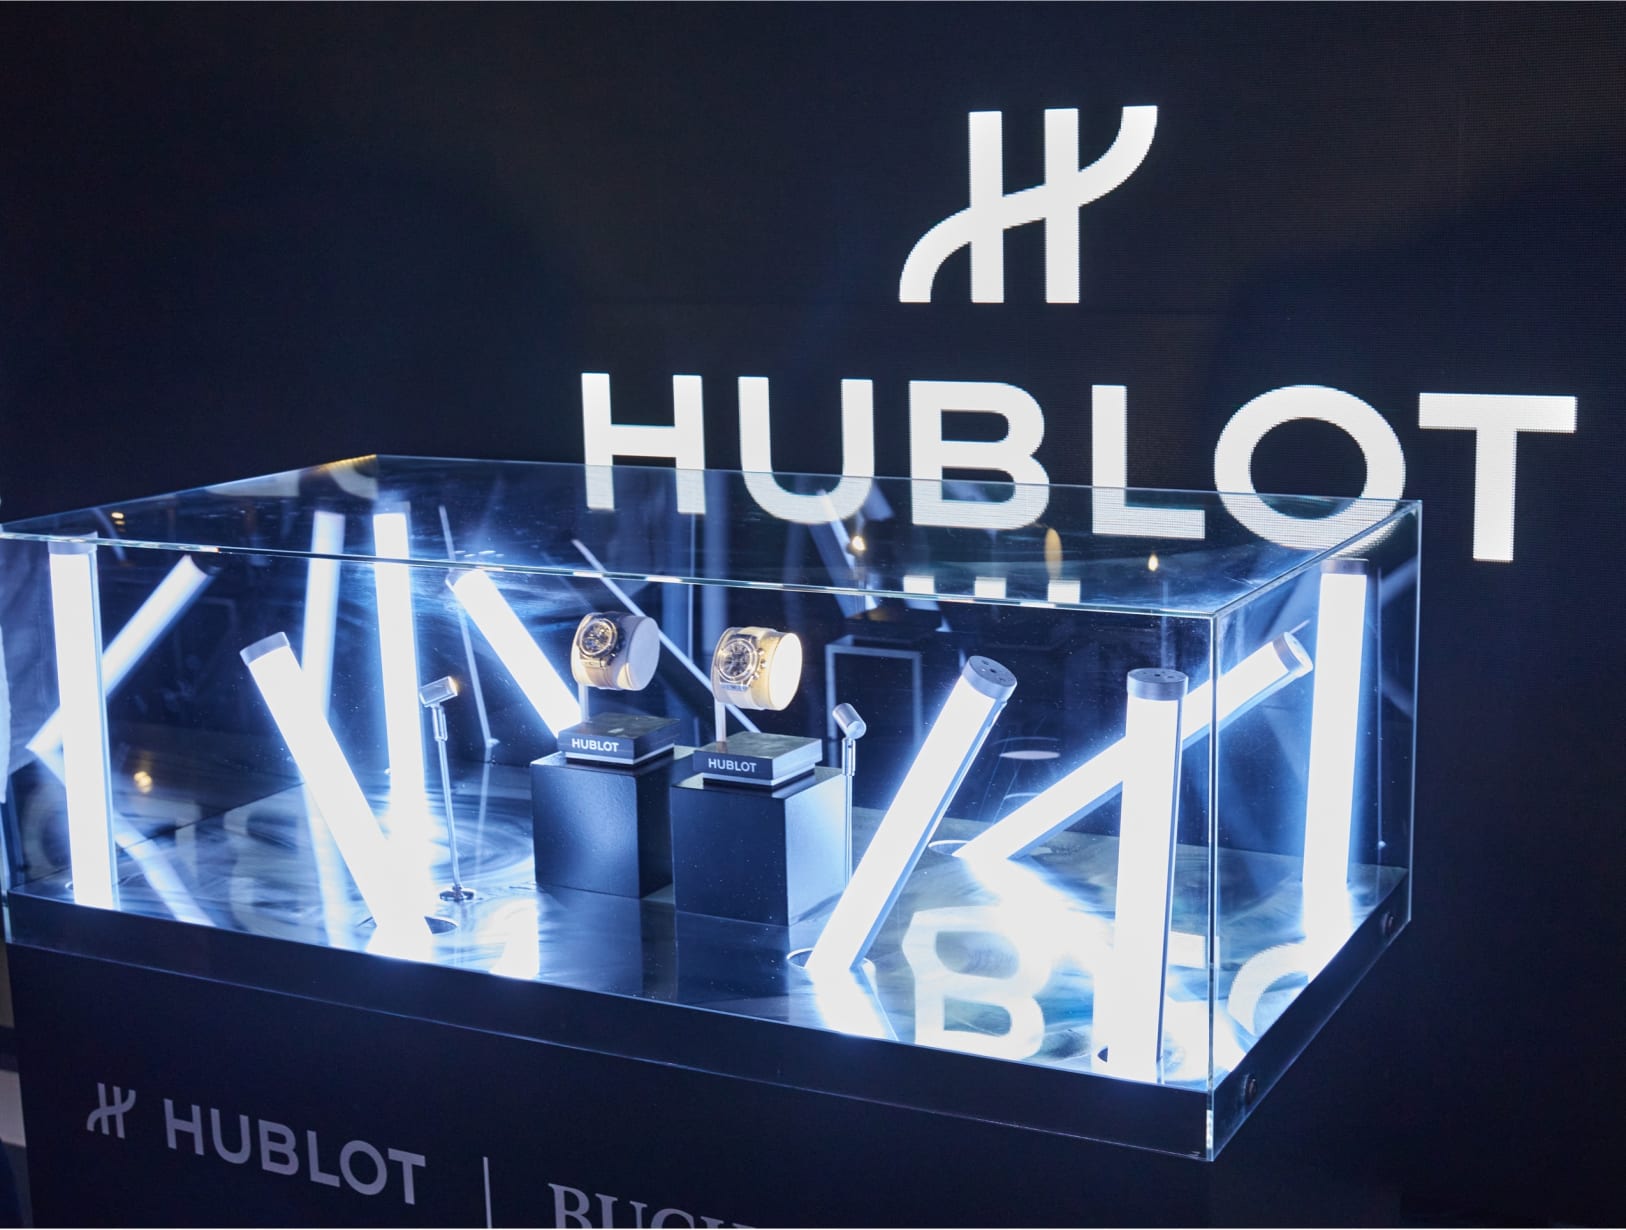 Moriarty Events hosted a stylish evening to reveal the much anticipated Hublot x Bucherer collection. Award-winning chef Alain Ducasse delighted...